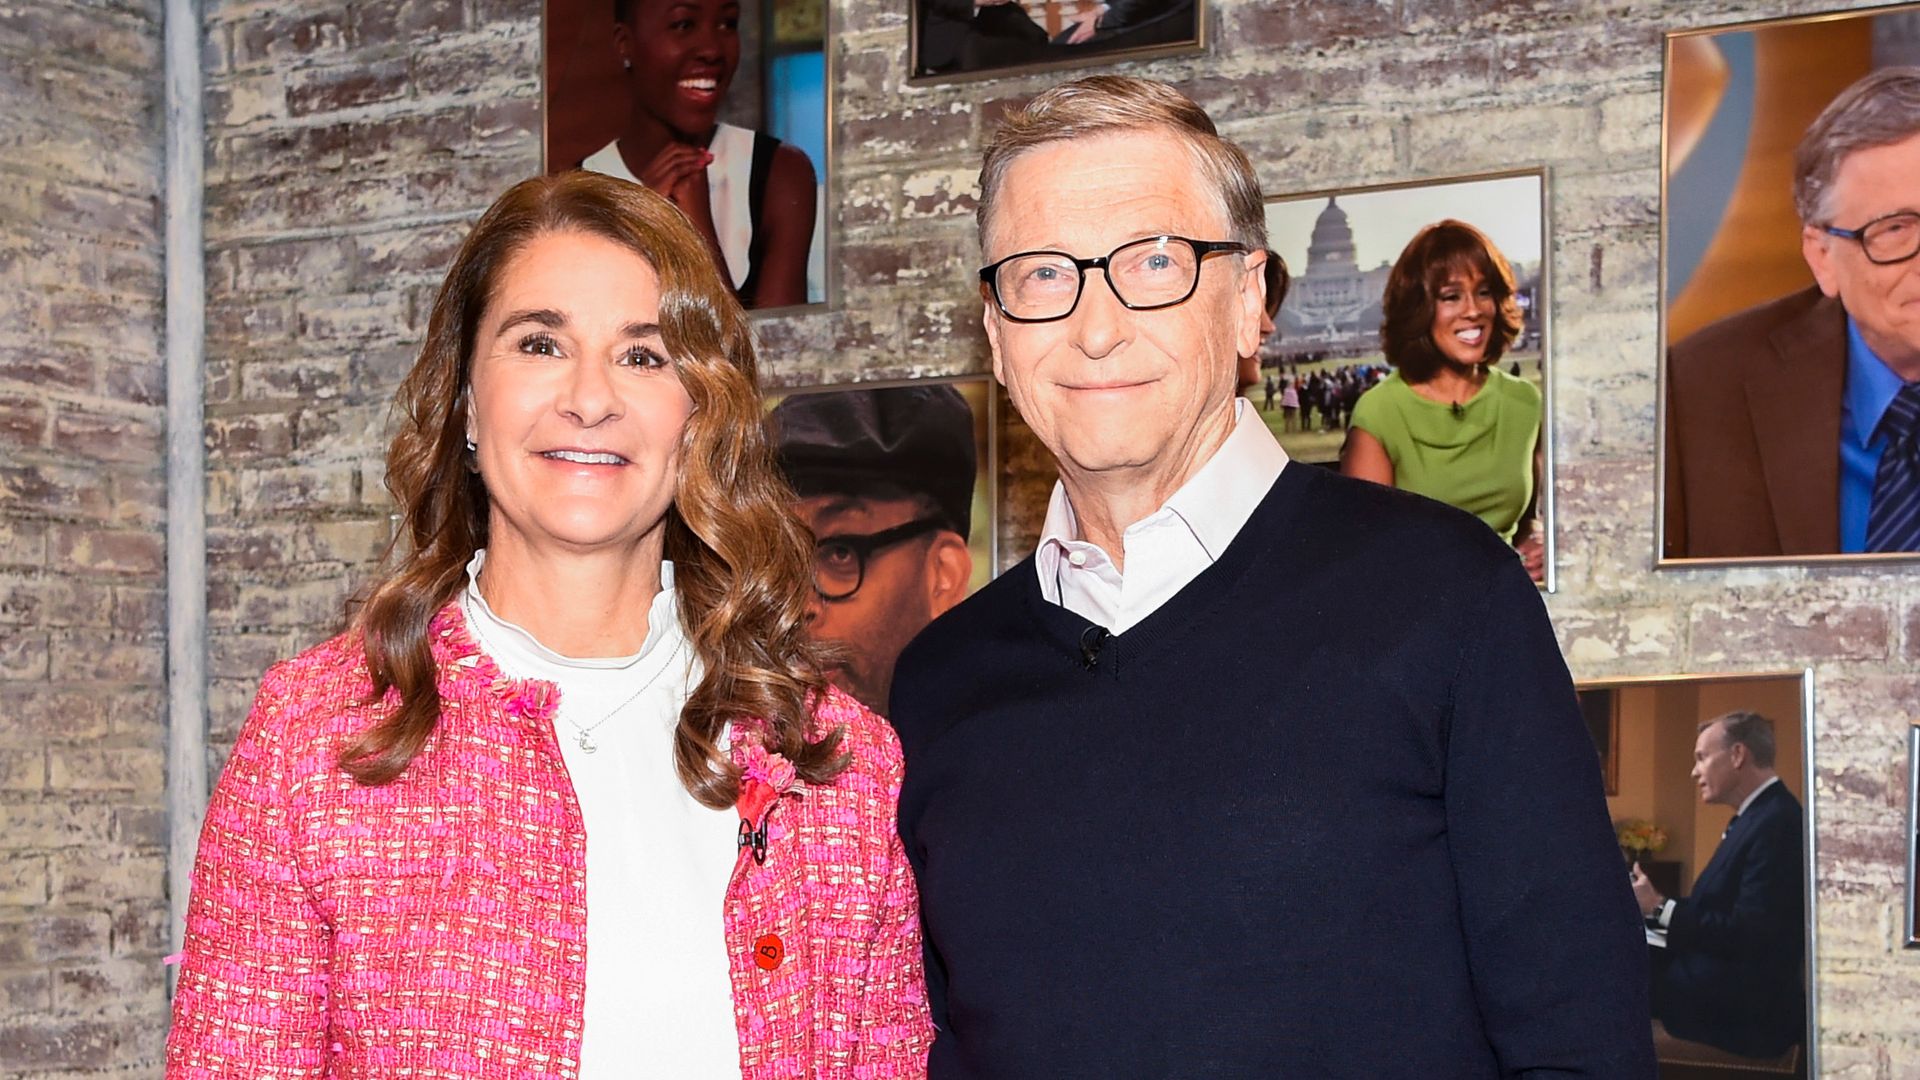 Bill and Melinda Gates in the CBS Toyota Greenroom before their appearance on CBS THIS MORNING, Feb 12, 2019